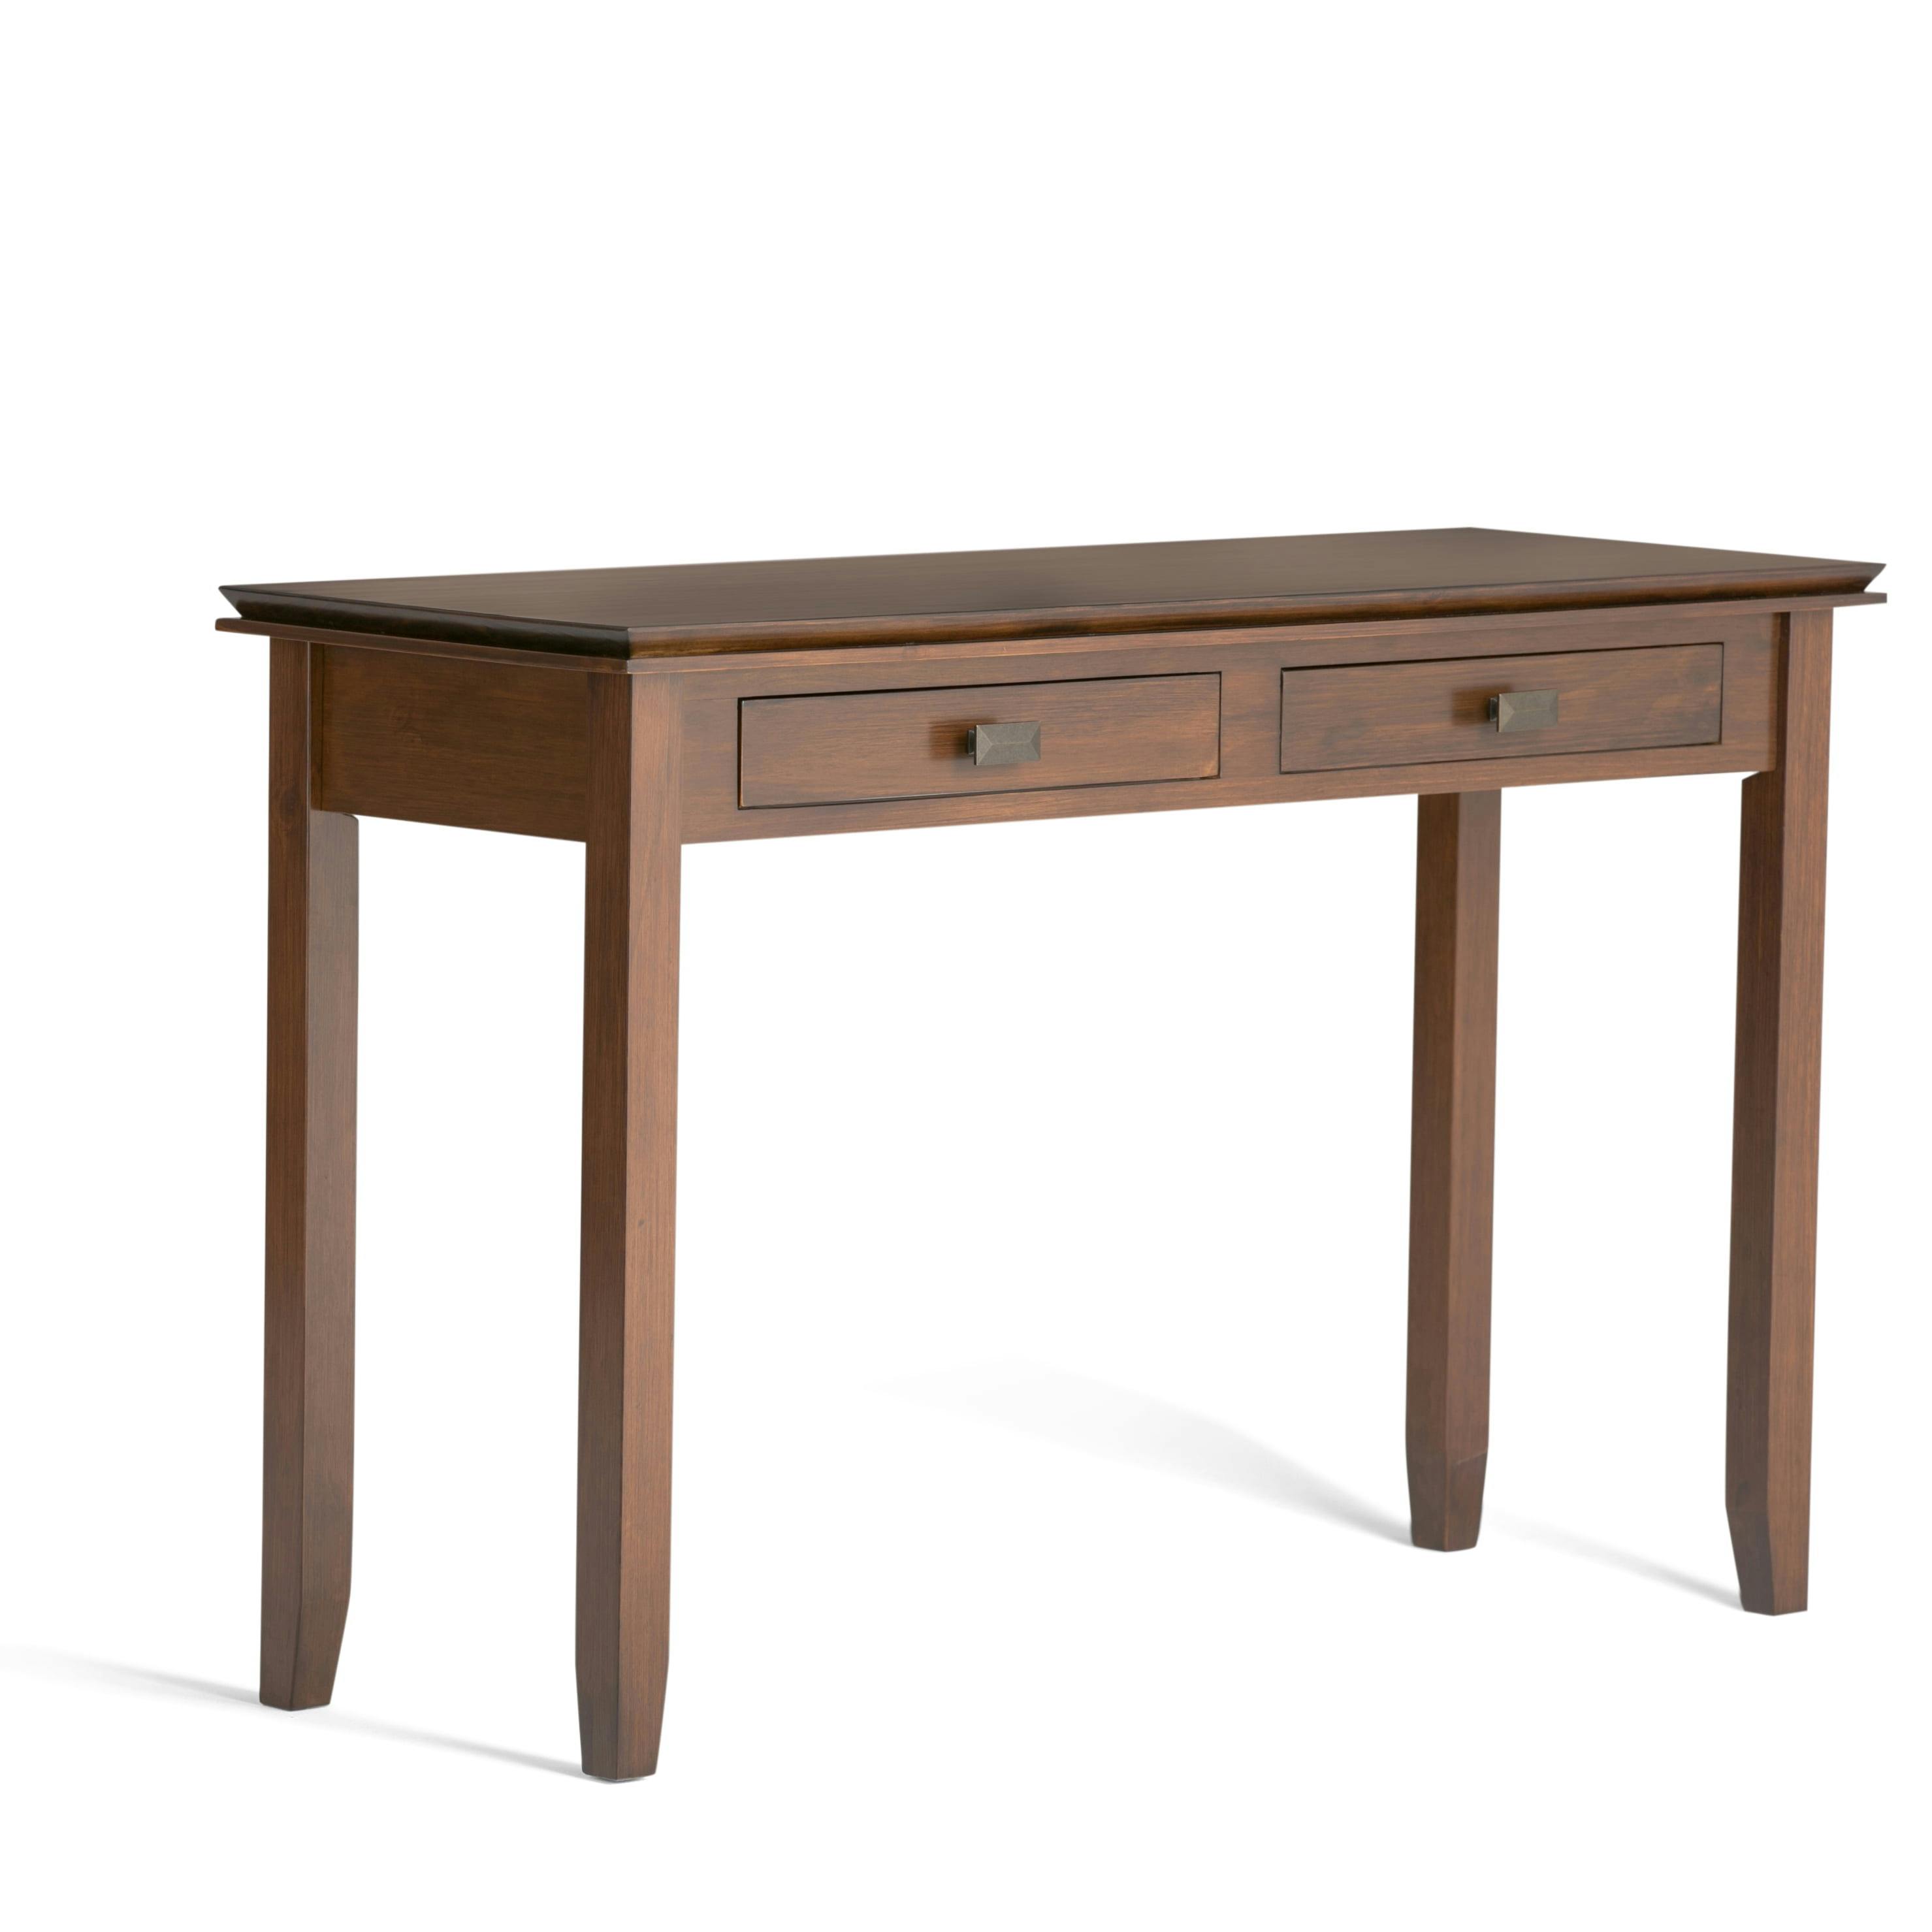 Artisan Transitional Solid Wood Console Table with Storage in Russet Brown